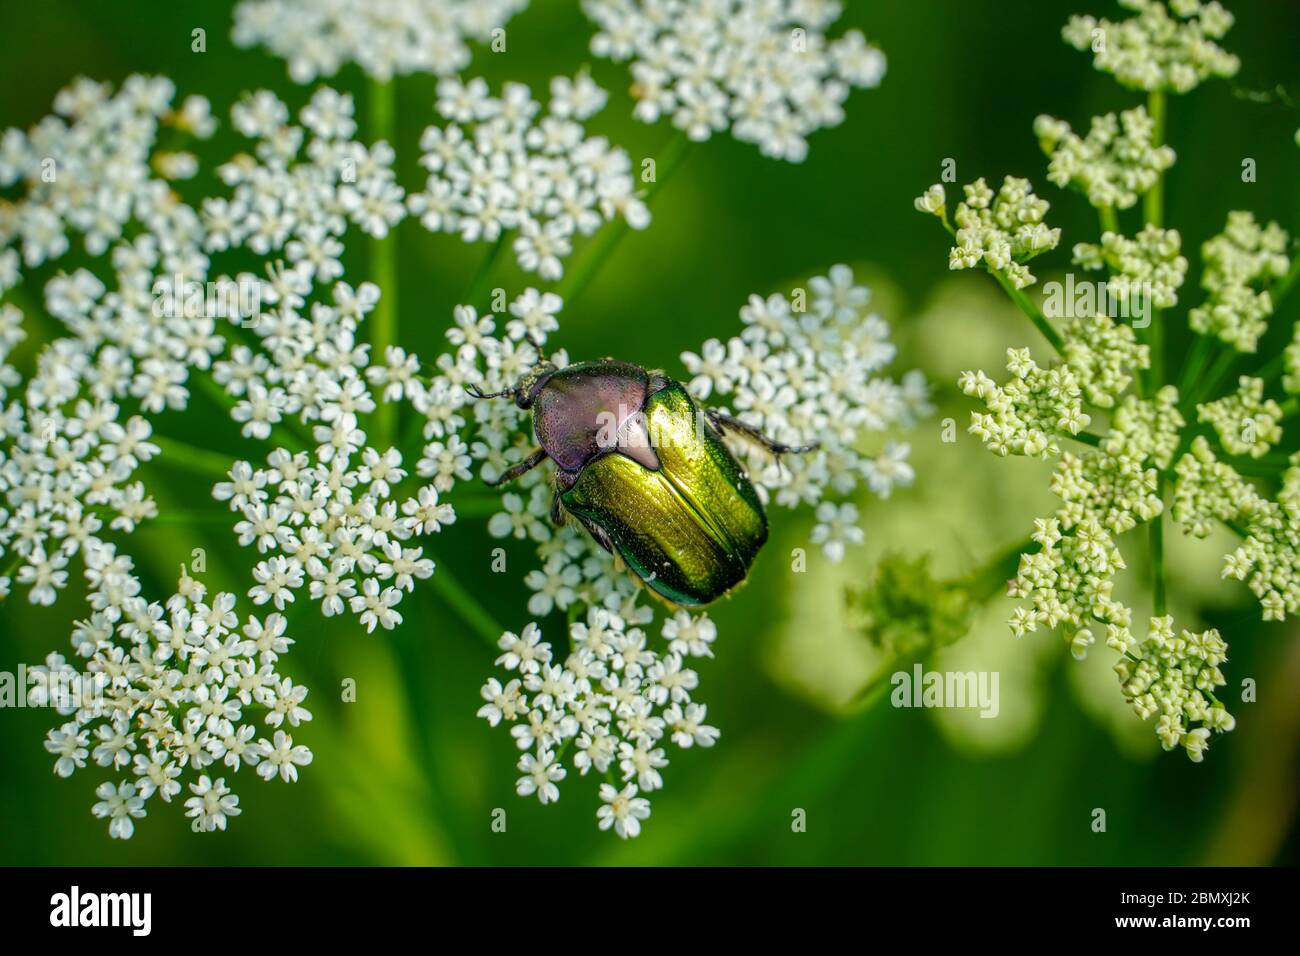 Cockchafer on flowers in the park, enjoying a sunny day Stock Photo